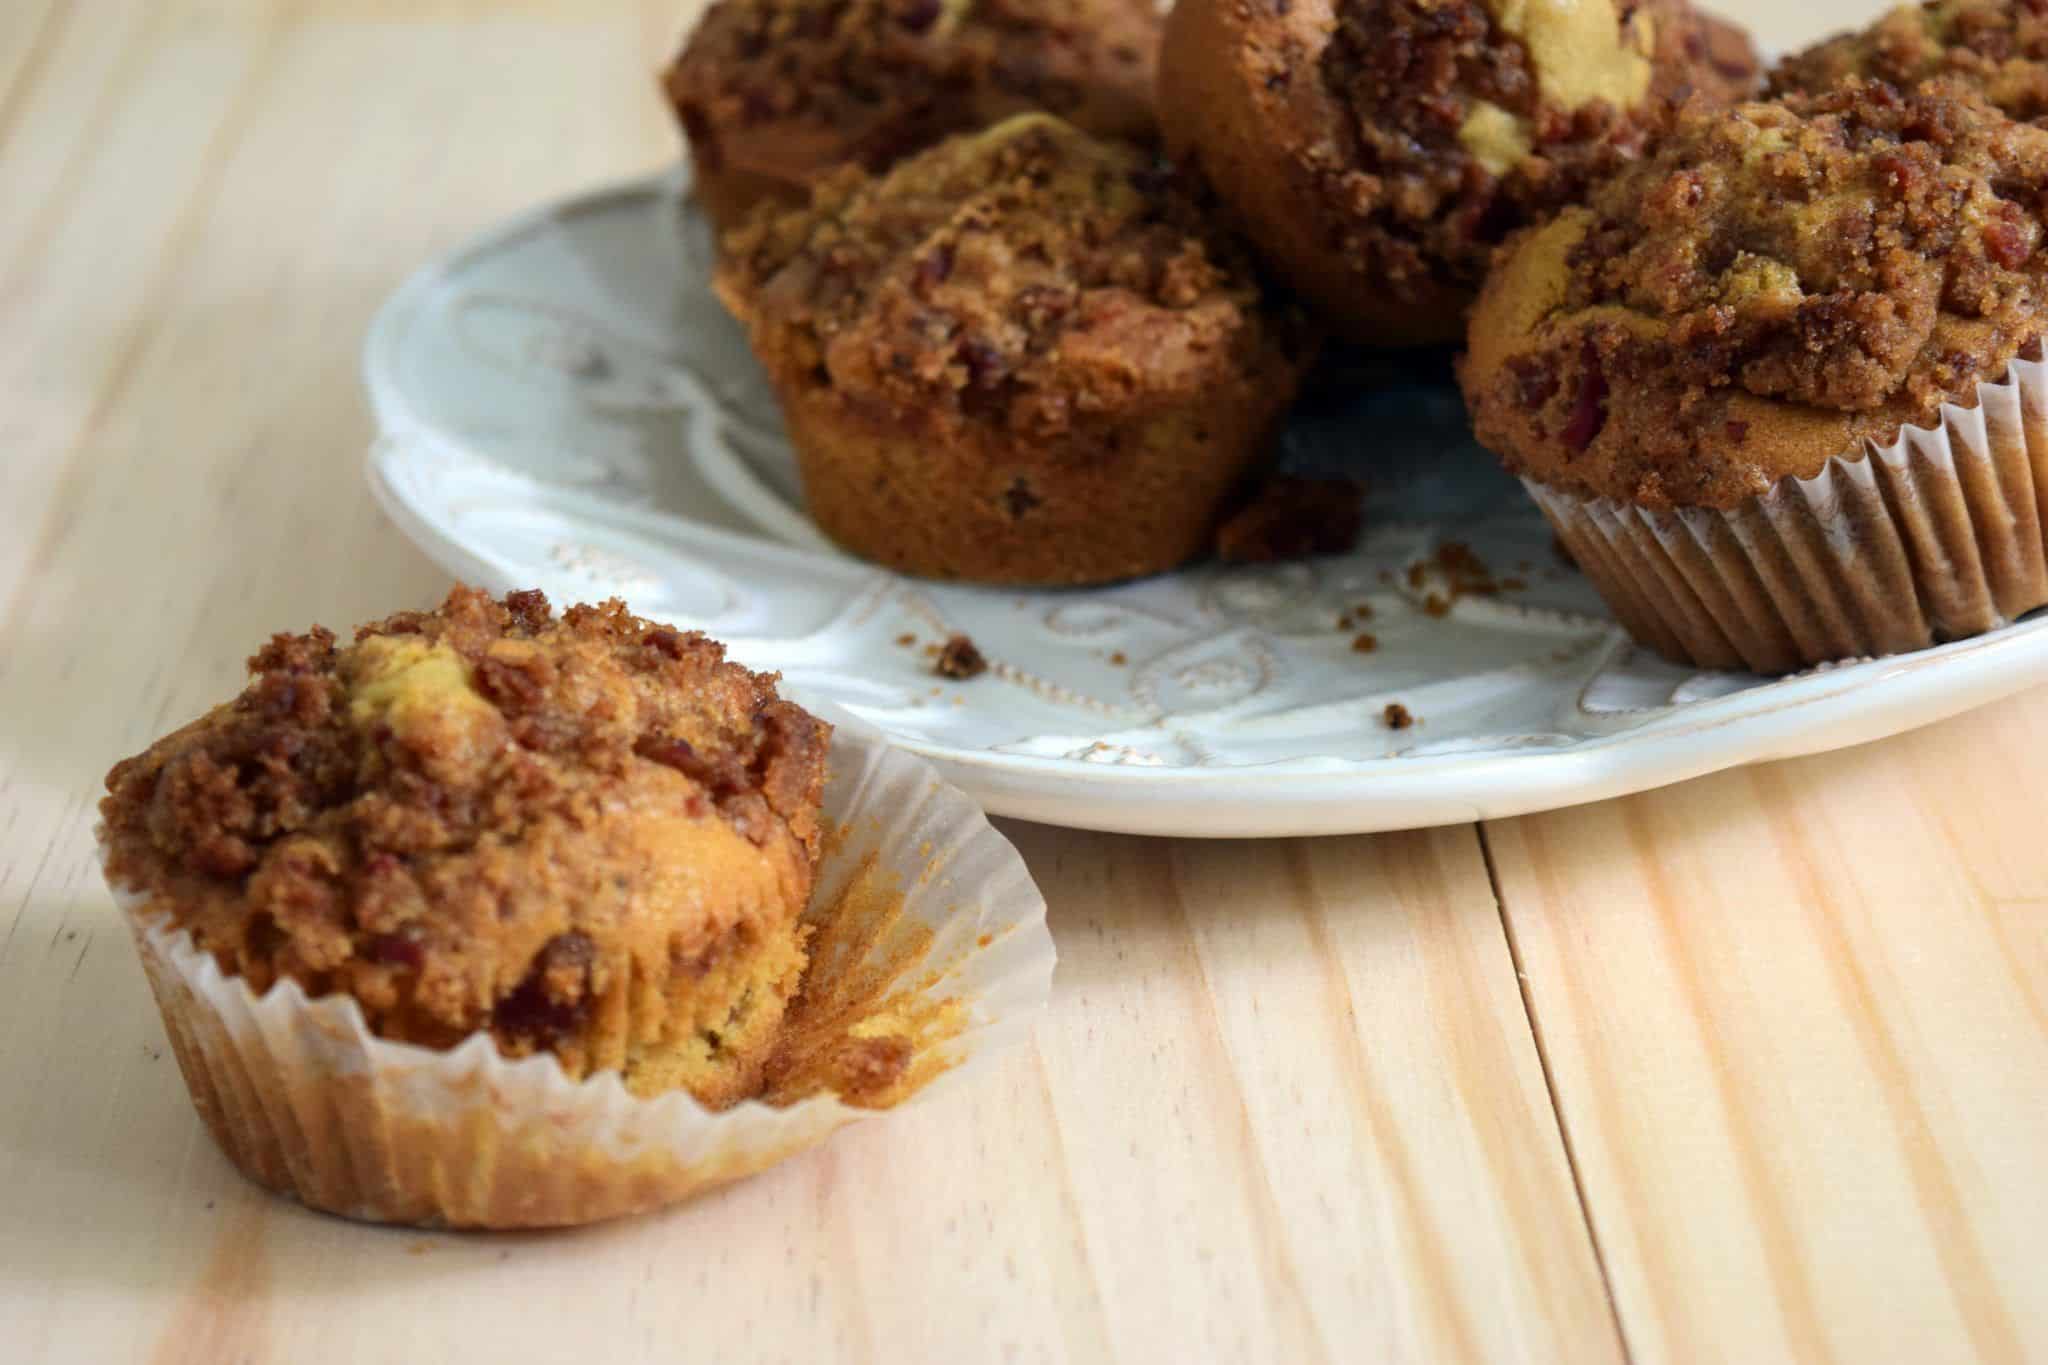 Maple Bacon Muffins with a Brown Sugar-Bacon Streusel